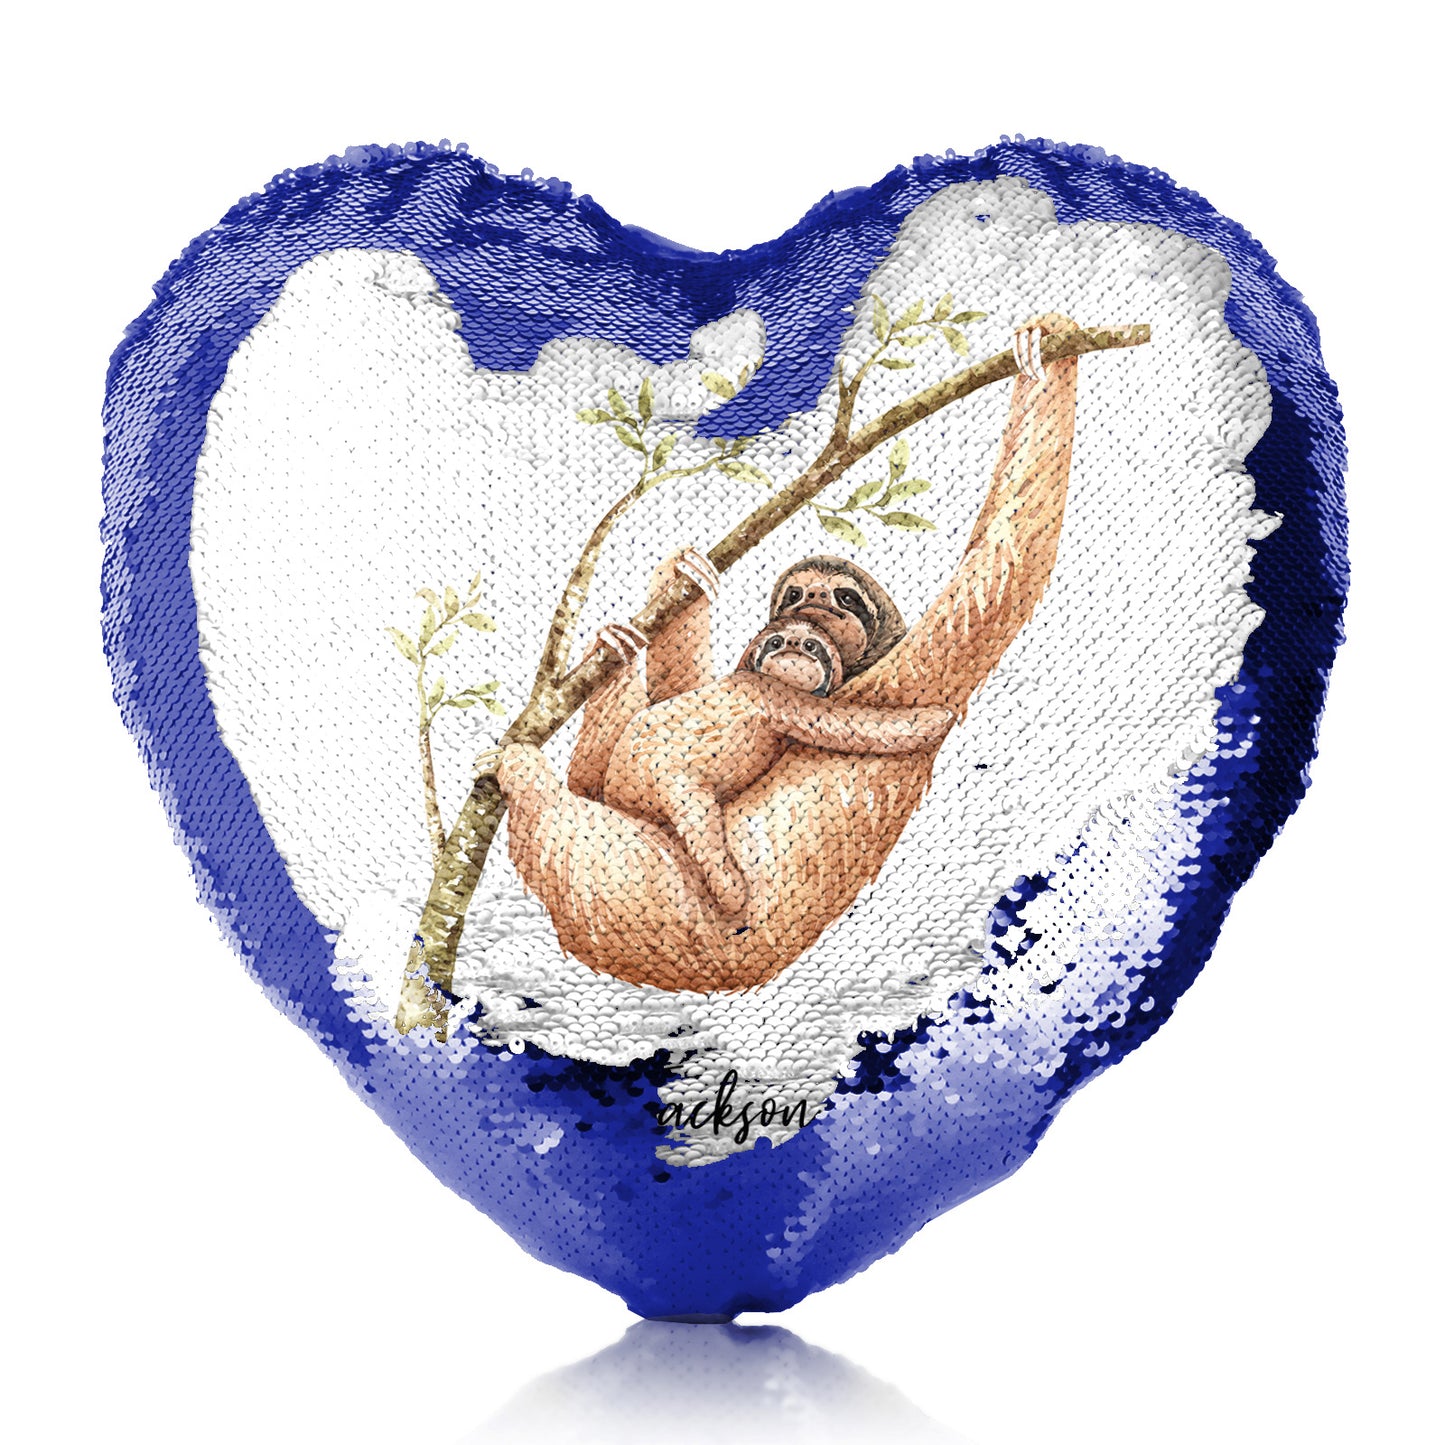 Personalised Sequin Heart Cushion with Welcoming Text and Climbing Mum and Baby Sloths